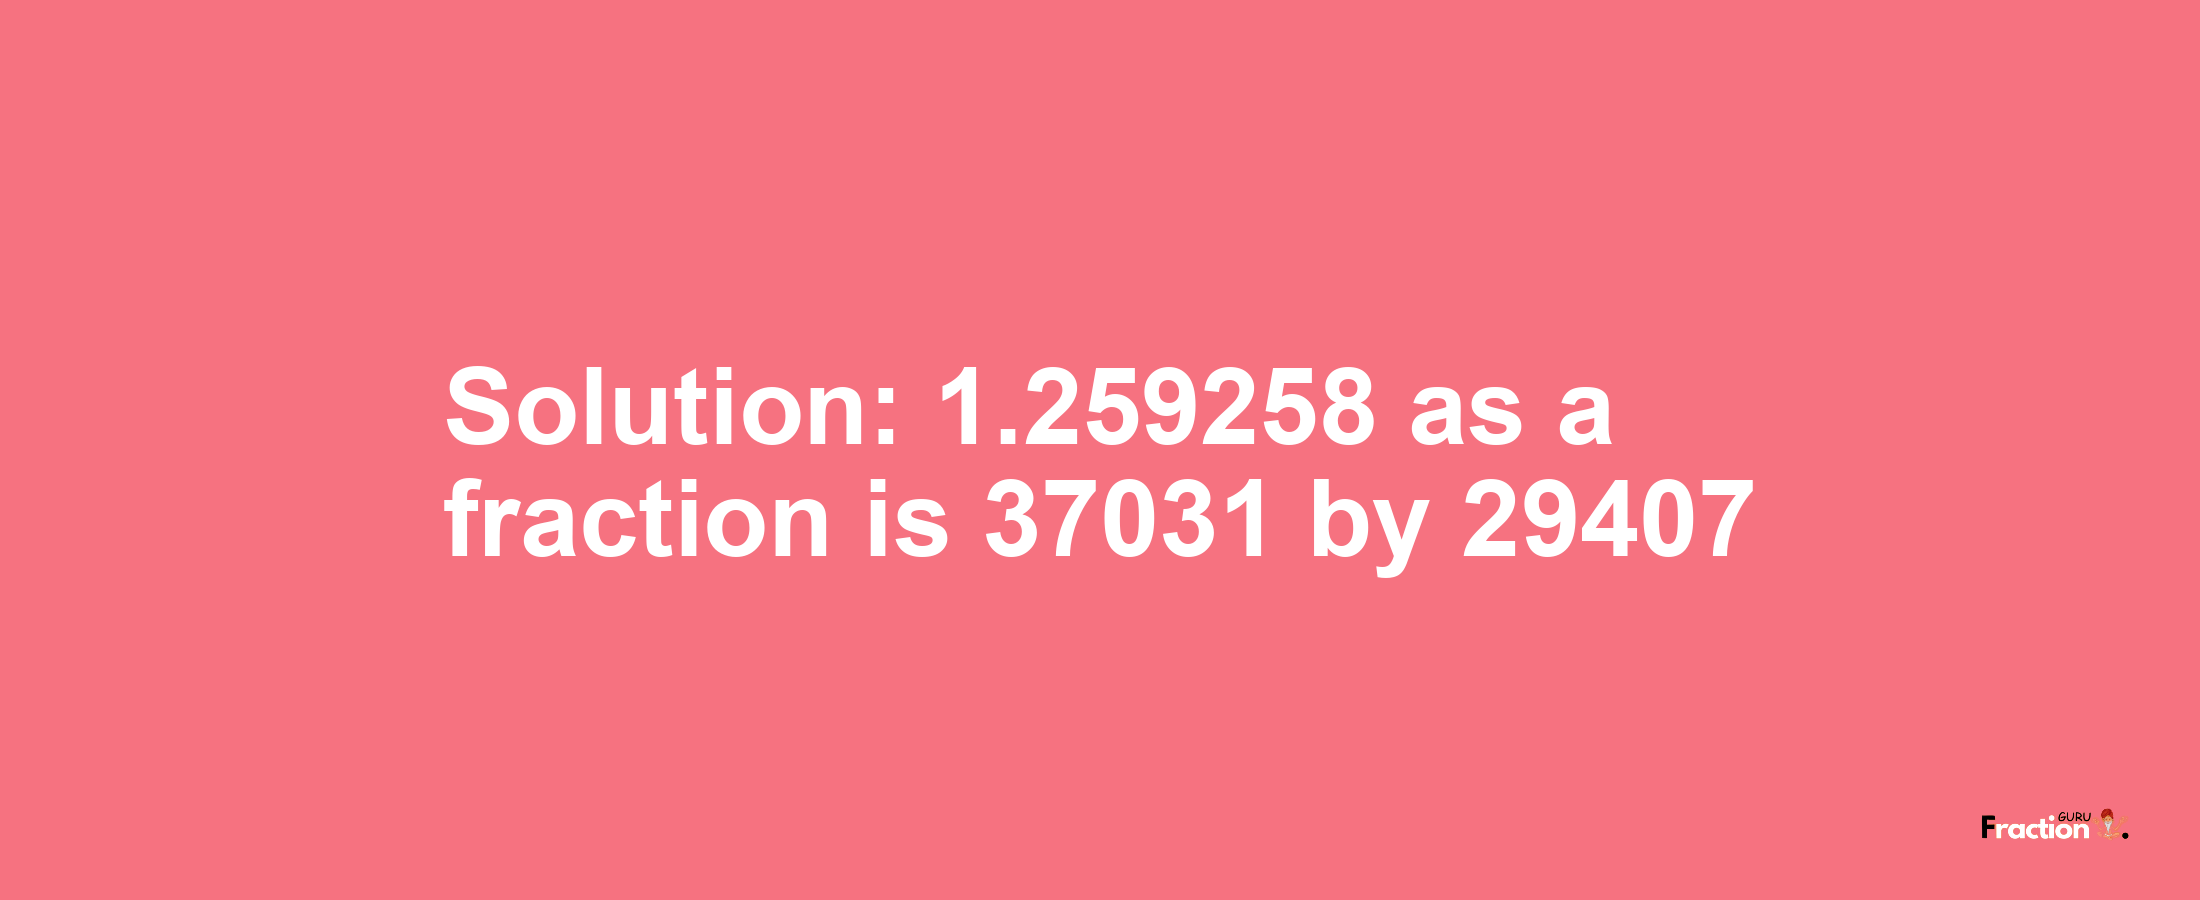 Solution:1.259258 as a fraction is 37031/29407